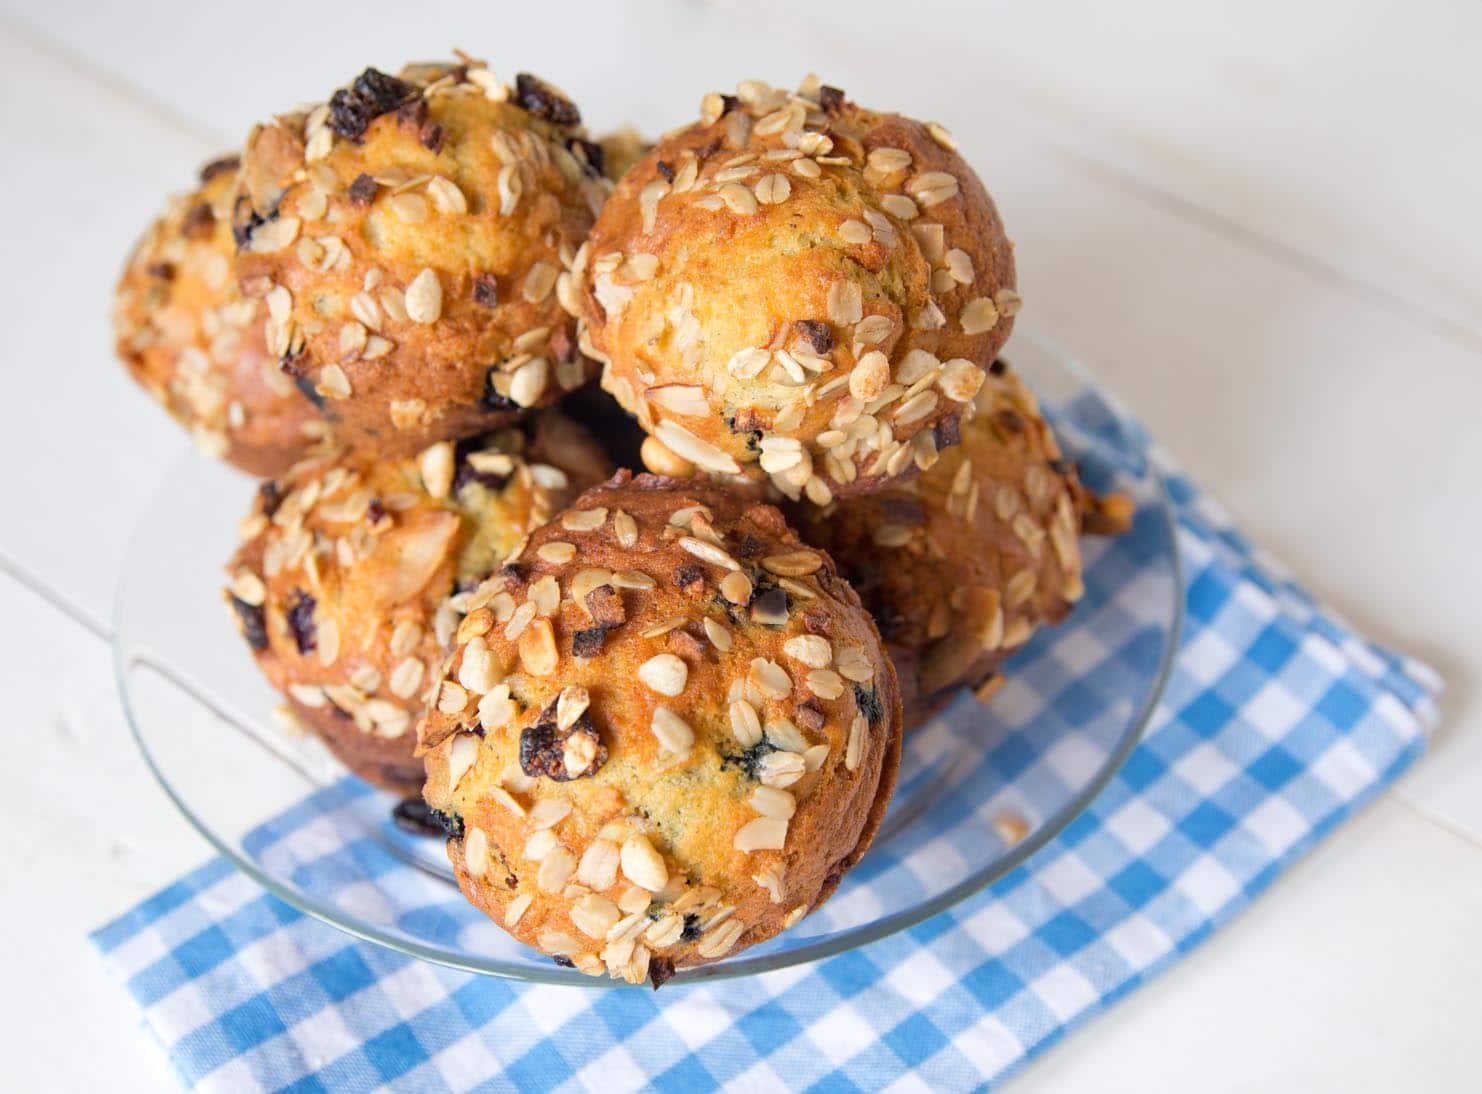 stack of Blueberry muesli muffins on a clear glass plate with a blue and white checkered napkin under the plate